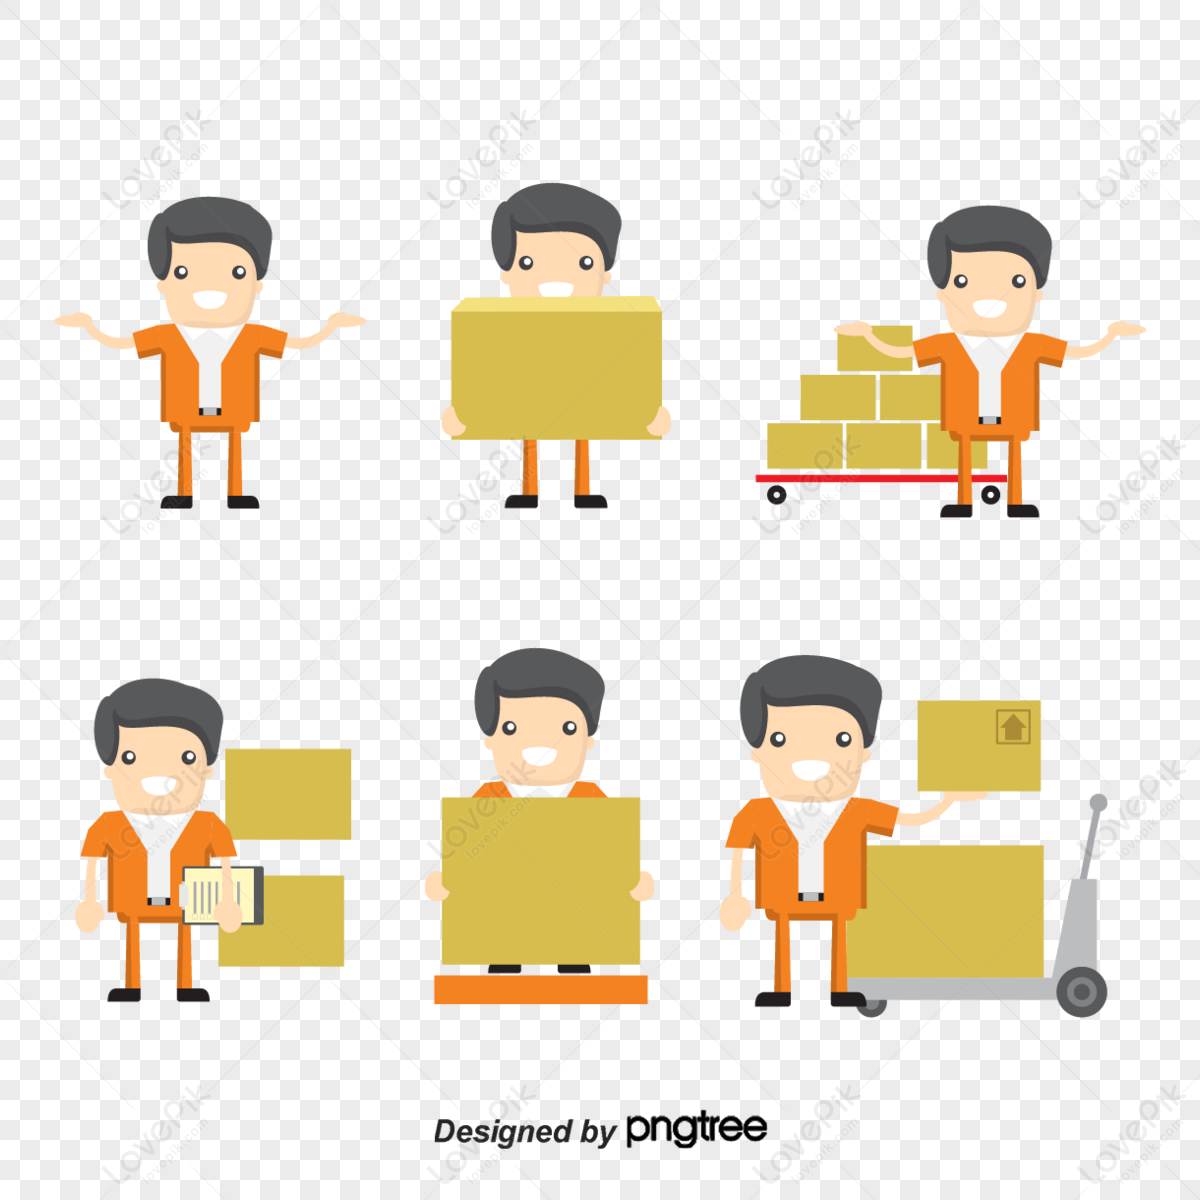 Delivery PNG Transparent Images - PNG All